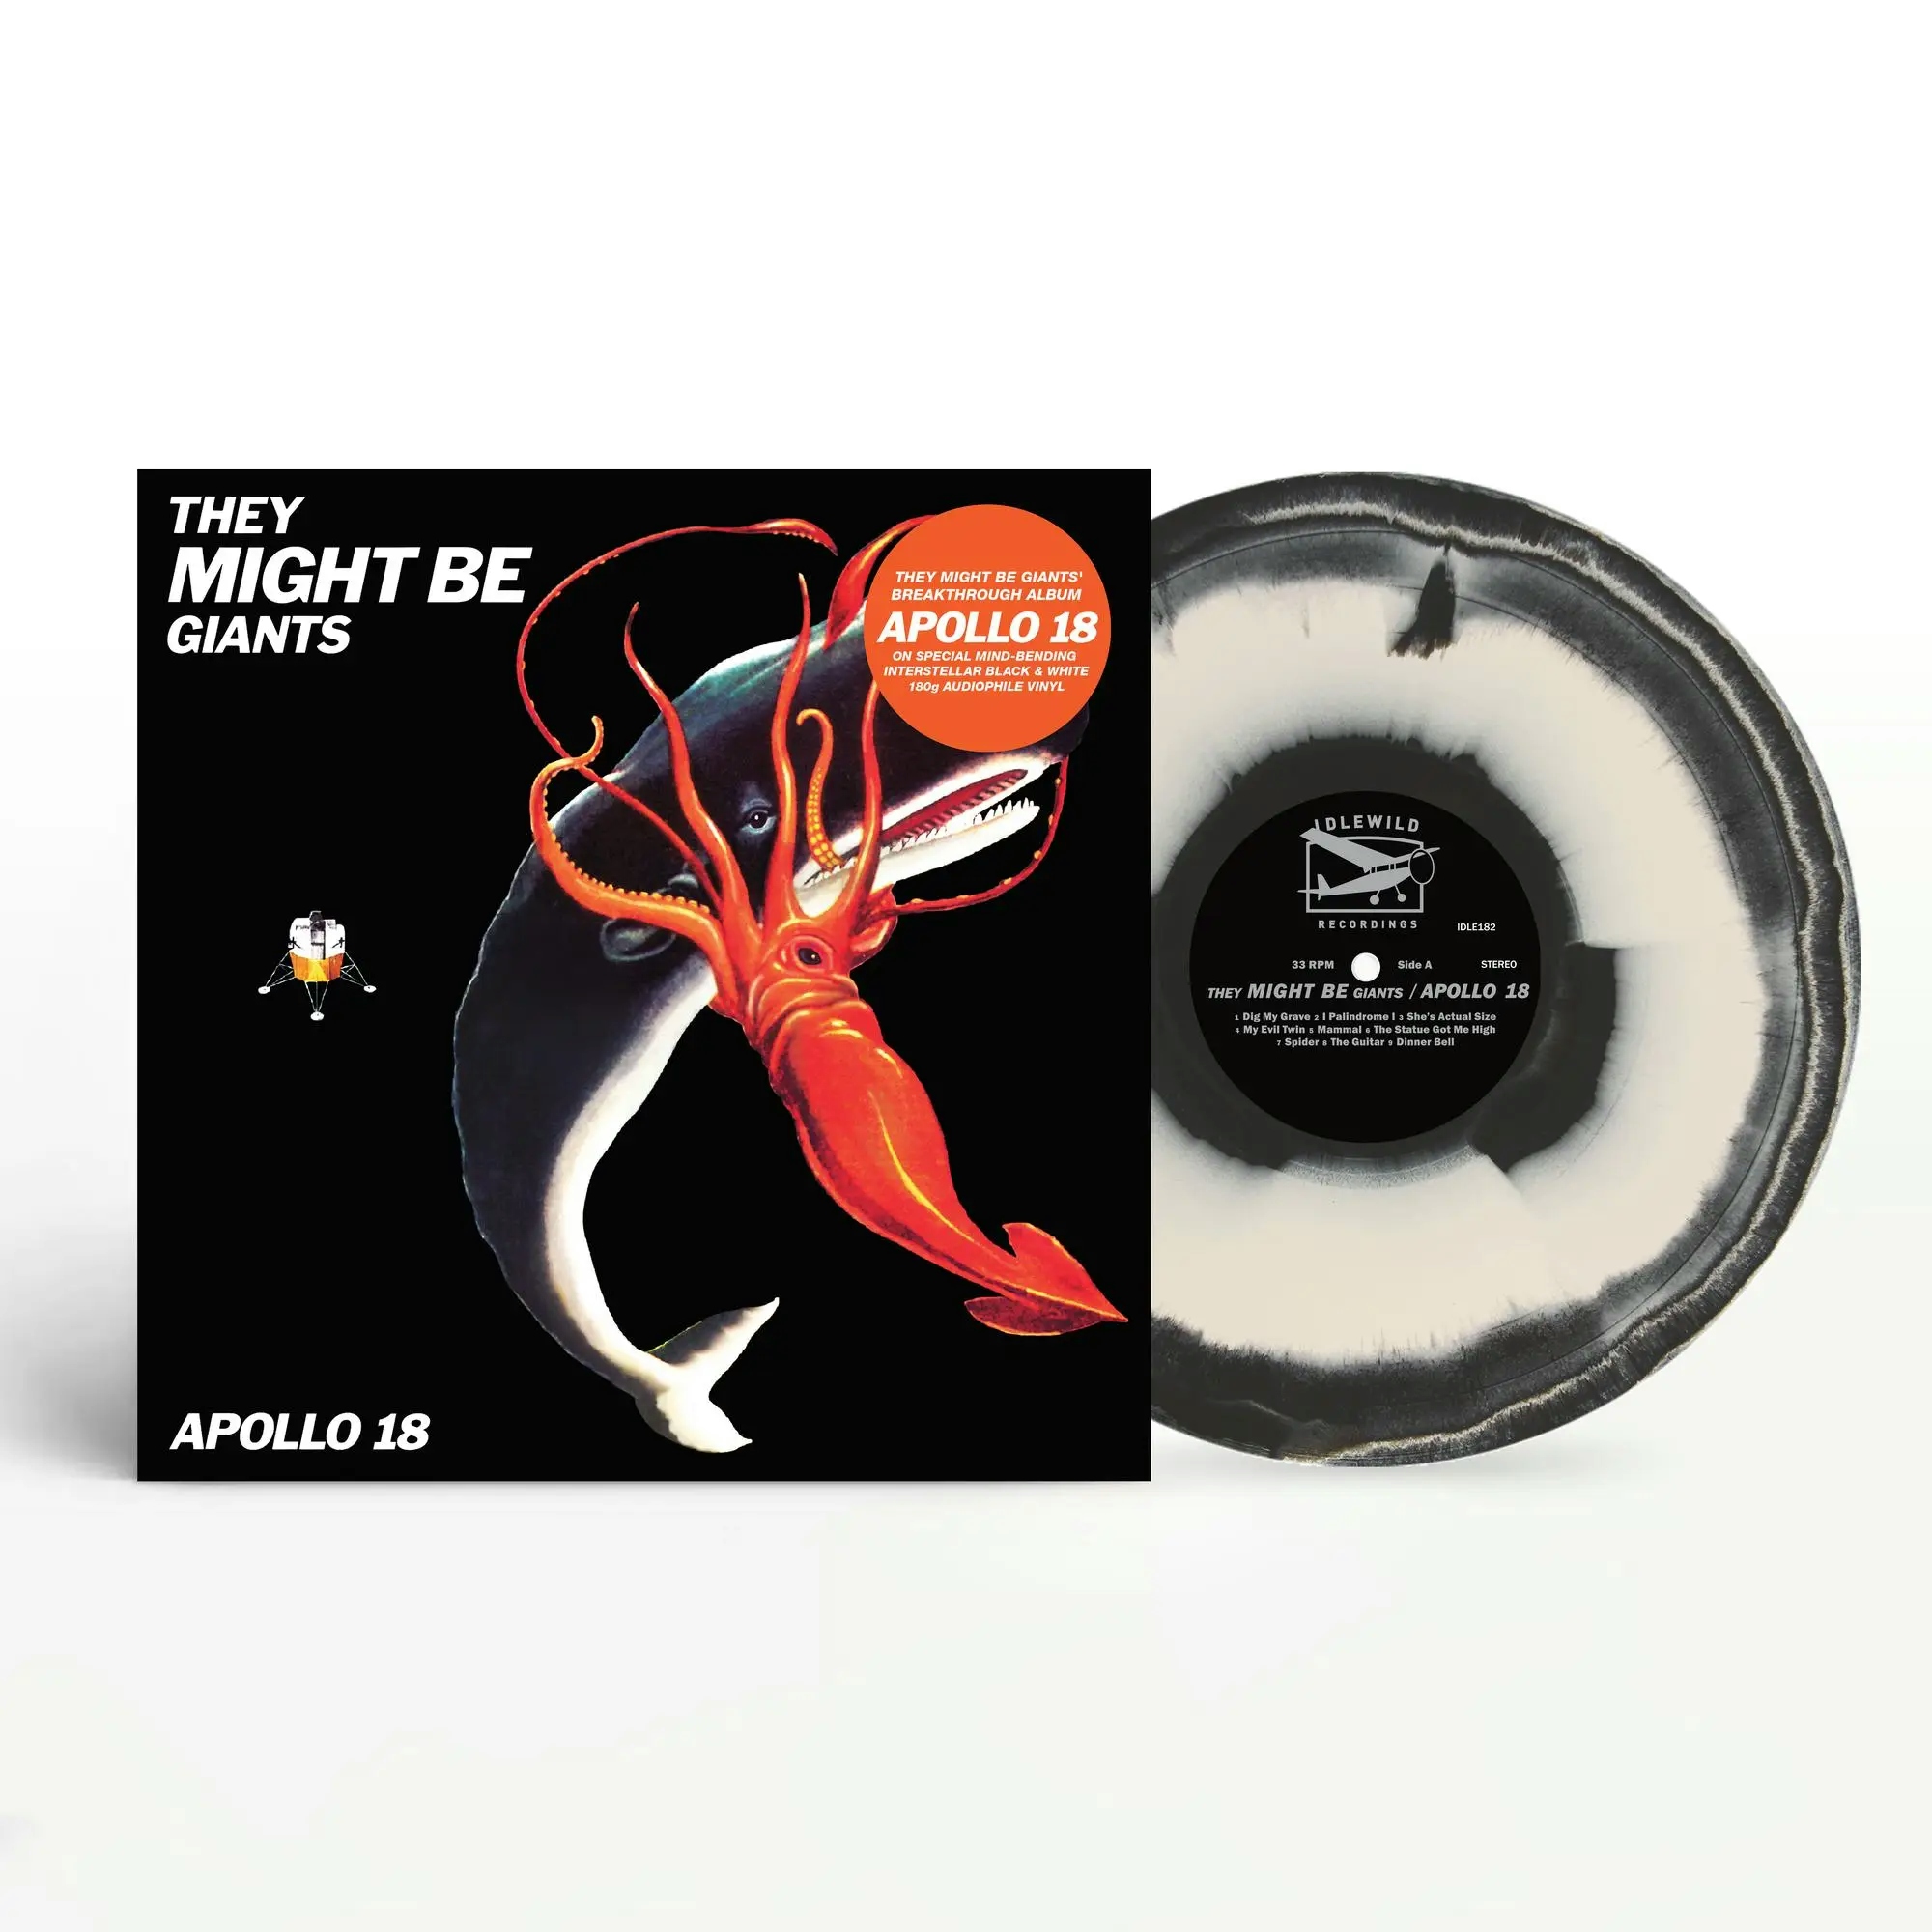 Album artwork for Apollo 18 by They Might Be Giants